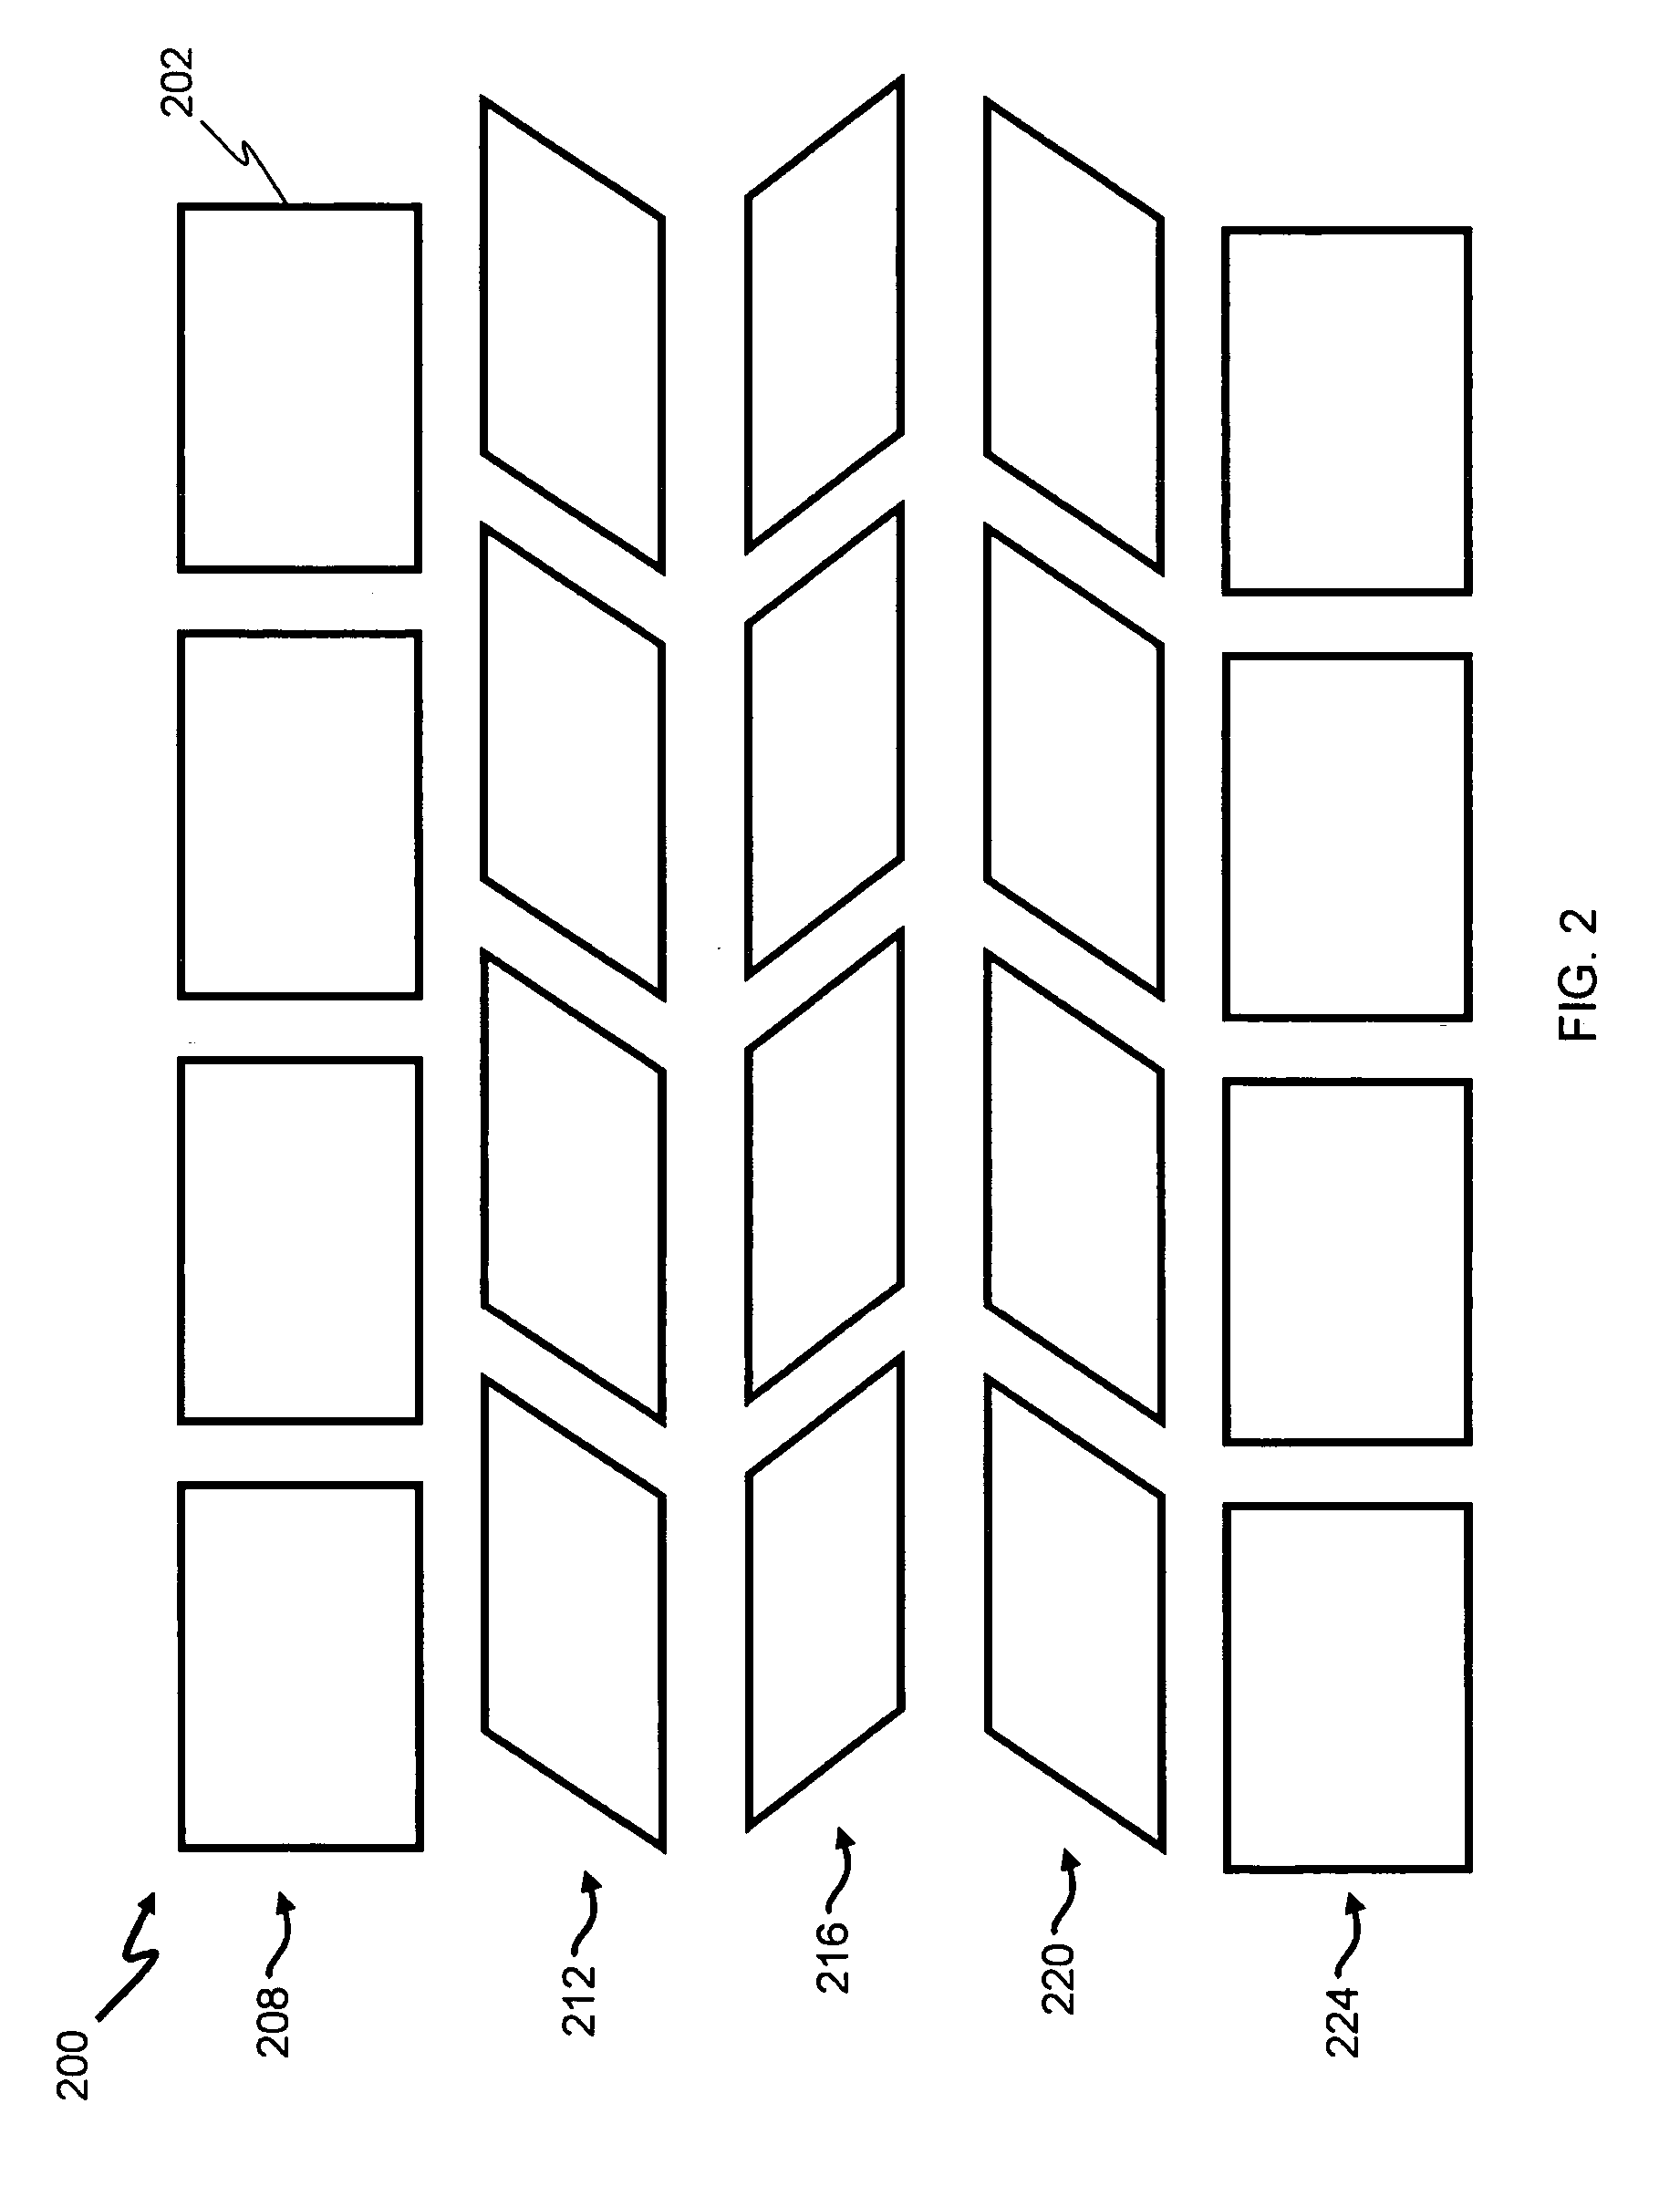 Method and system for tread pattern noise optimization